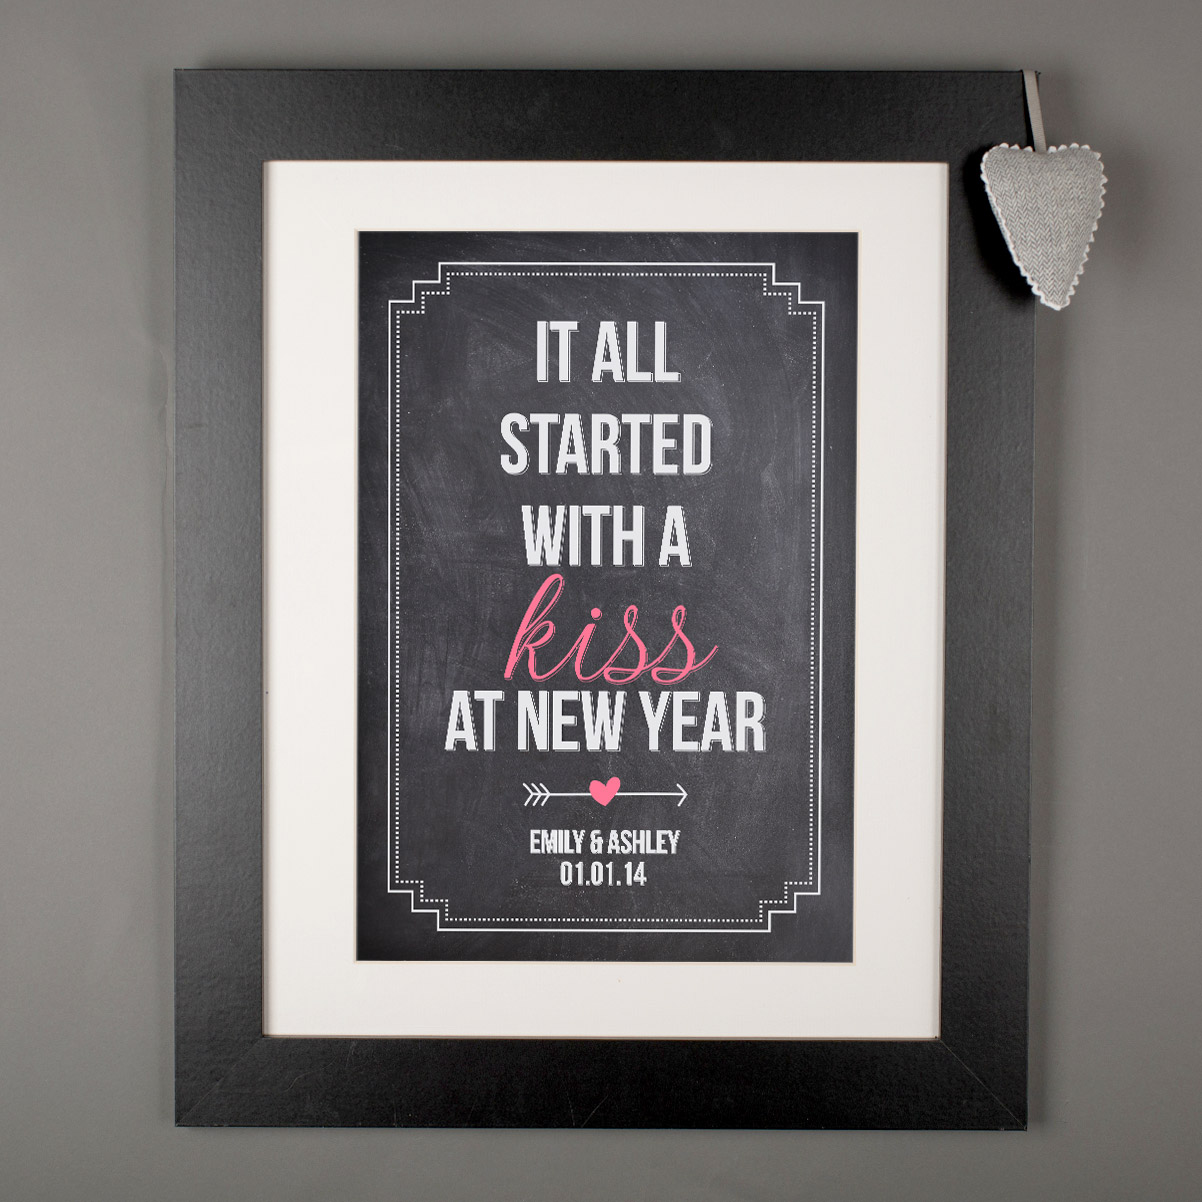 Personalised Framed Print - It All Started..